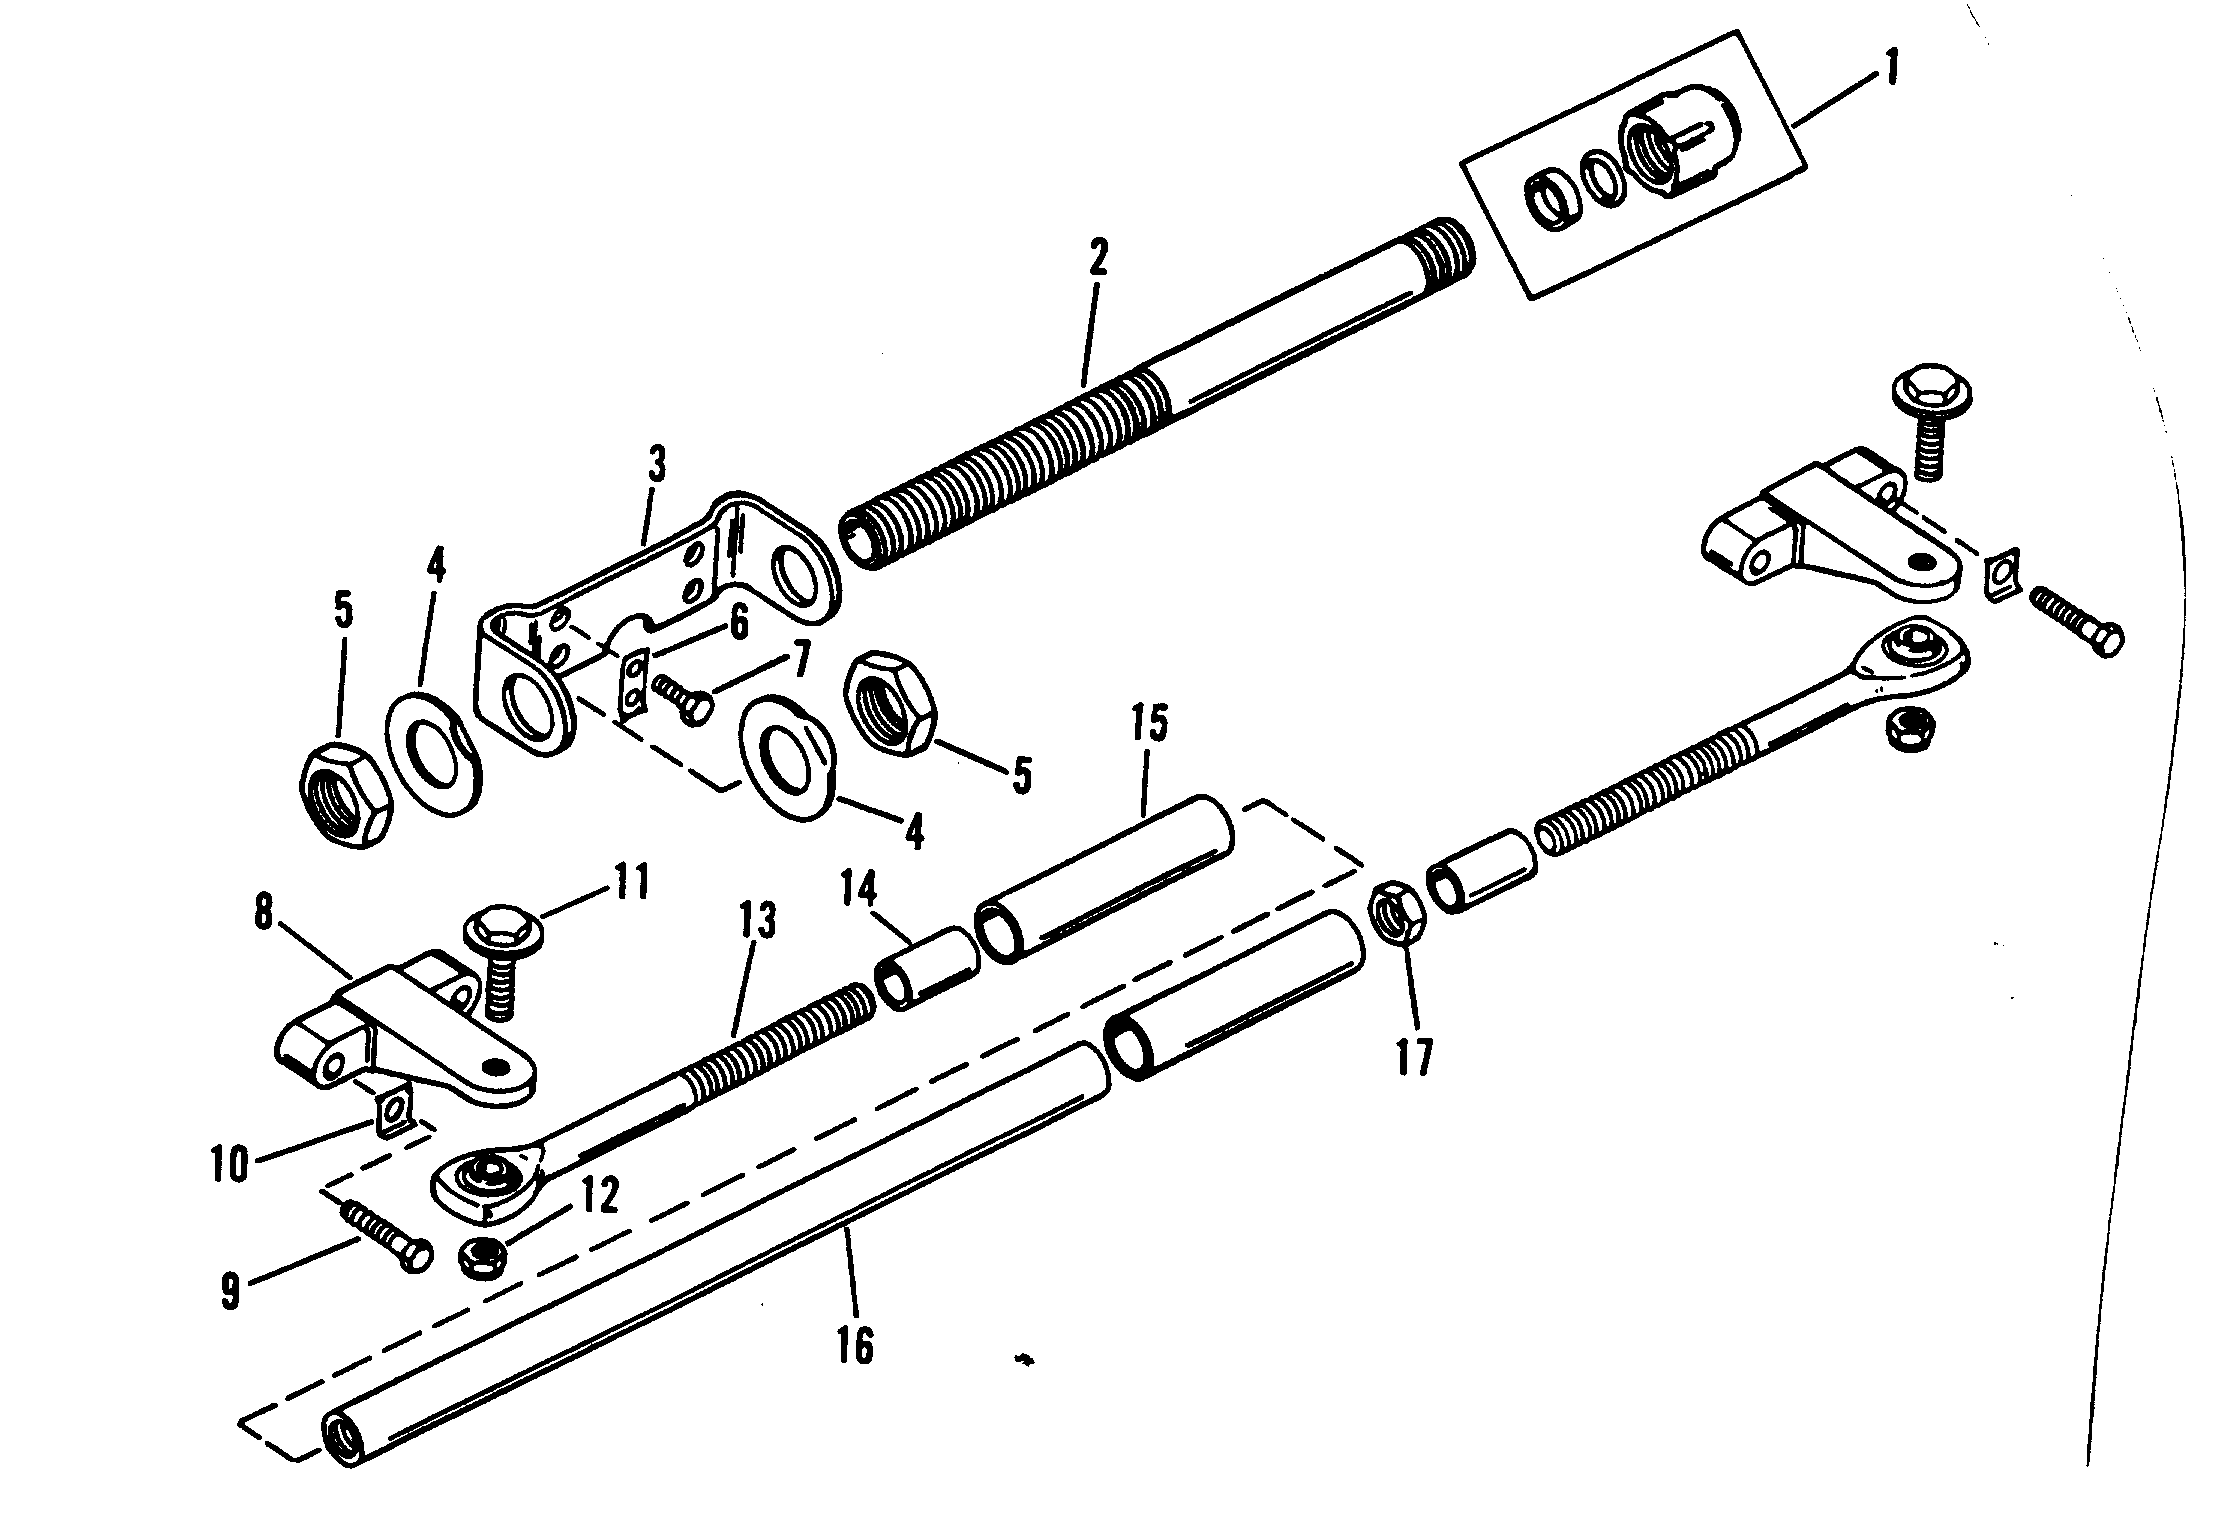 DUAL ENGINE EXTENSION KIT (COUNTER ROTATION DESIGN I)